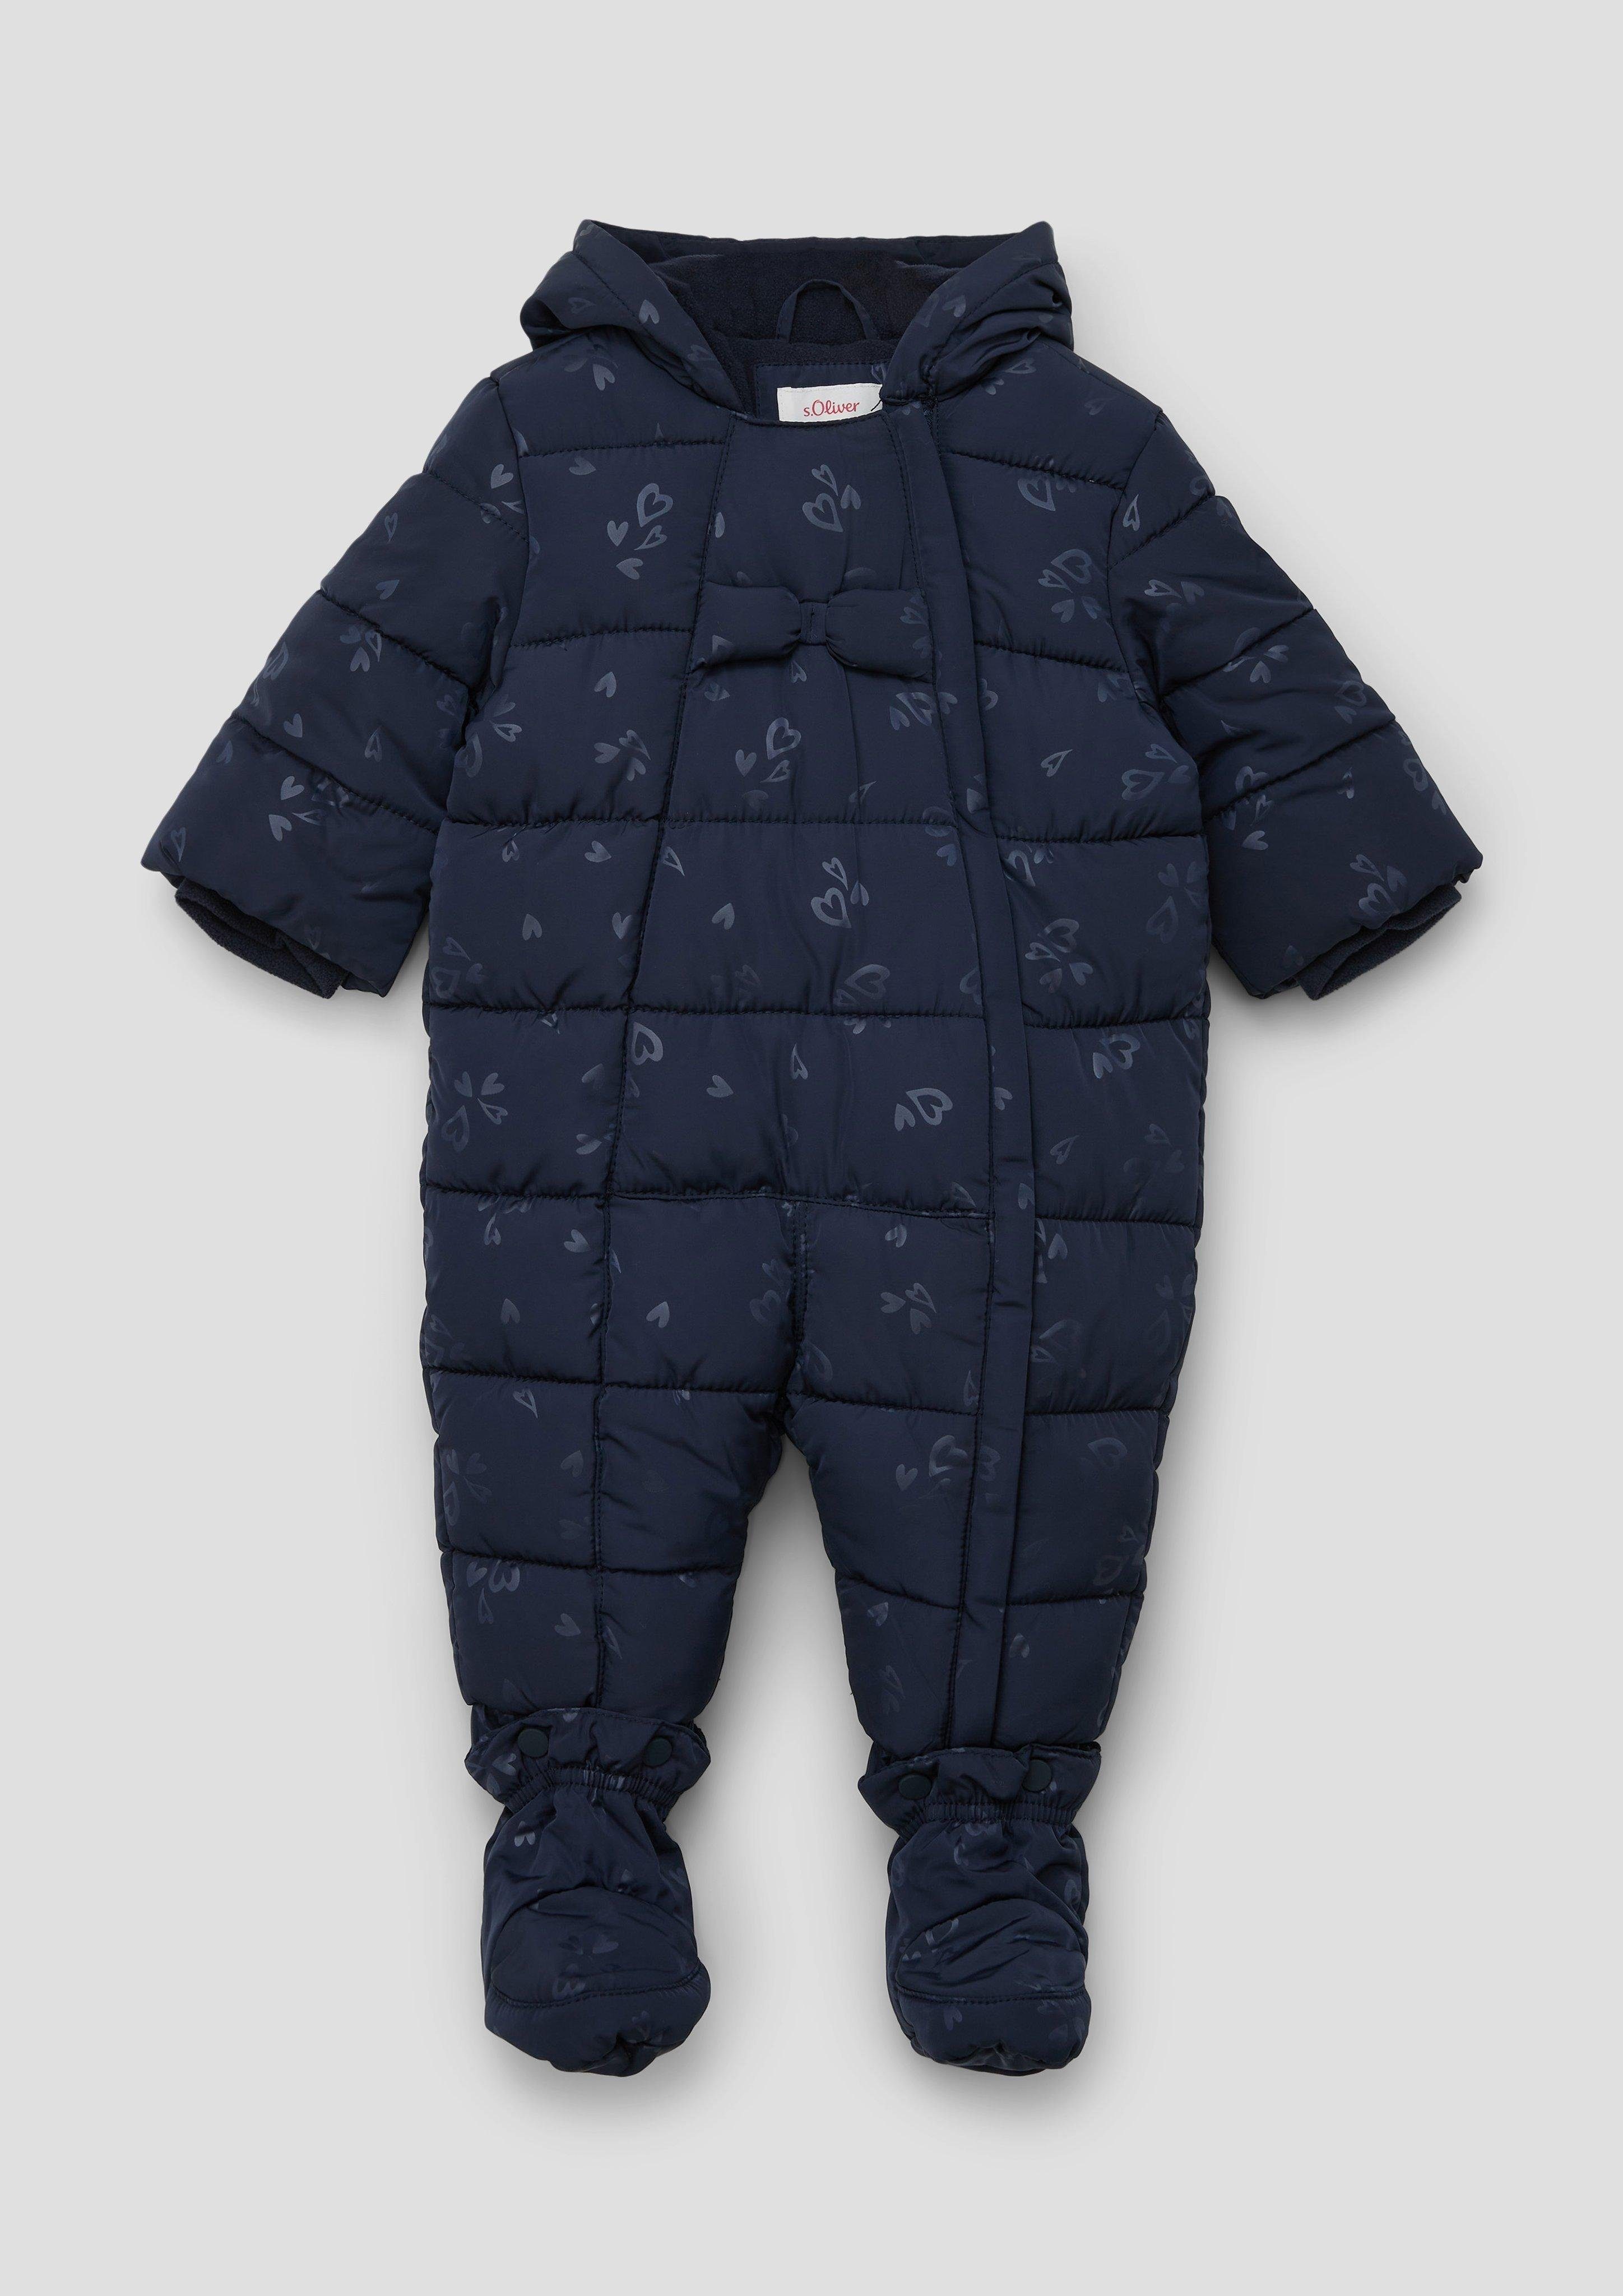 abnehmbaren mit Baby-Overall Overall s.Oliver Schleife Schuhen